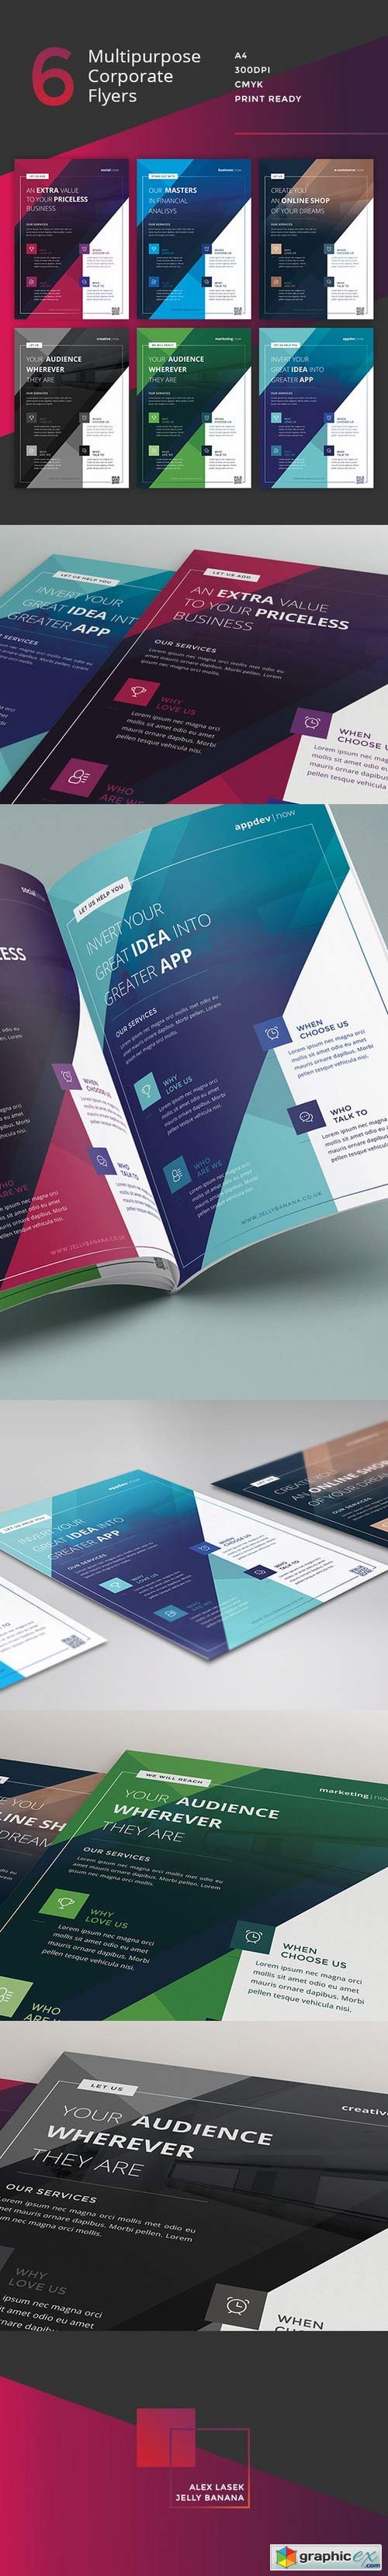 6 Multipurpose Business Flyers, Ads 379450